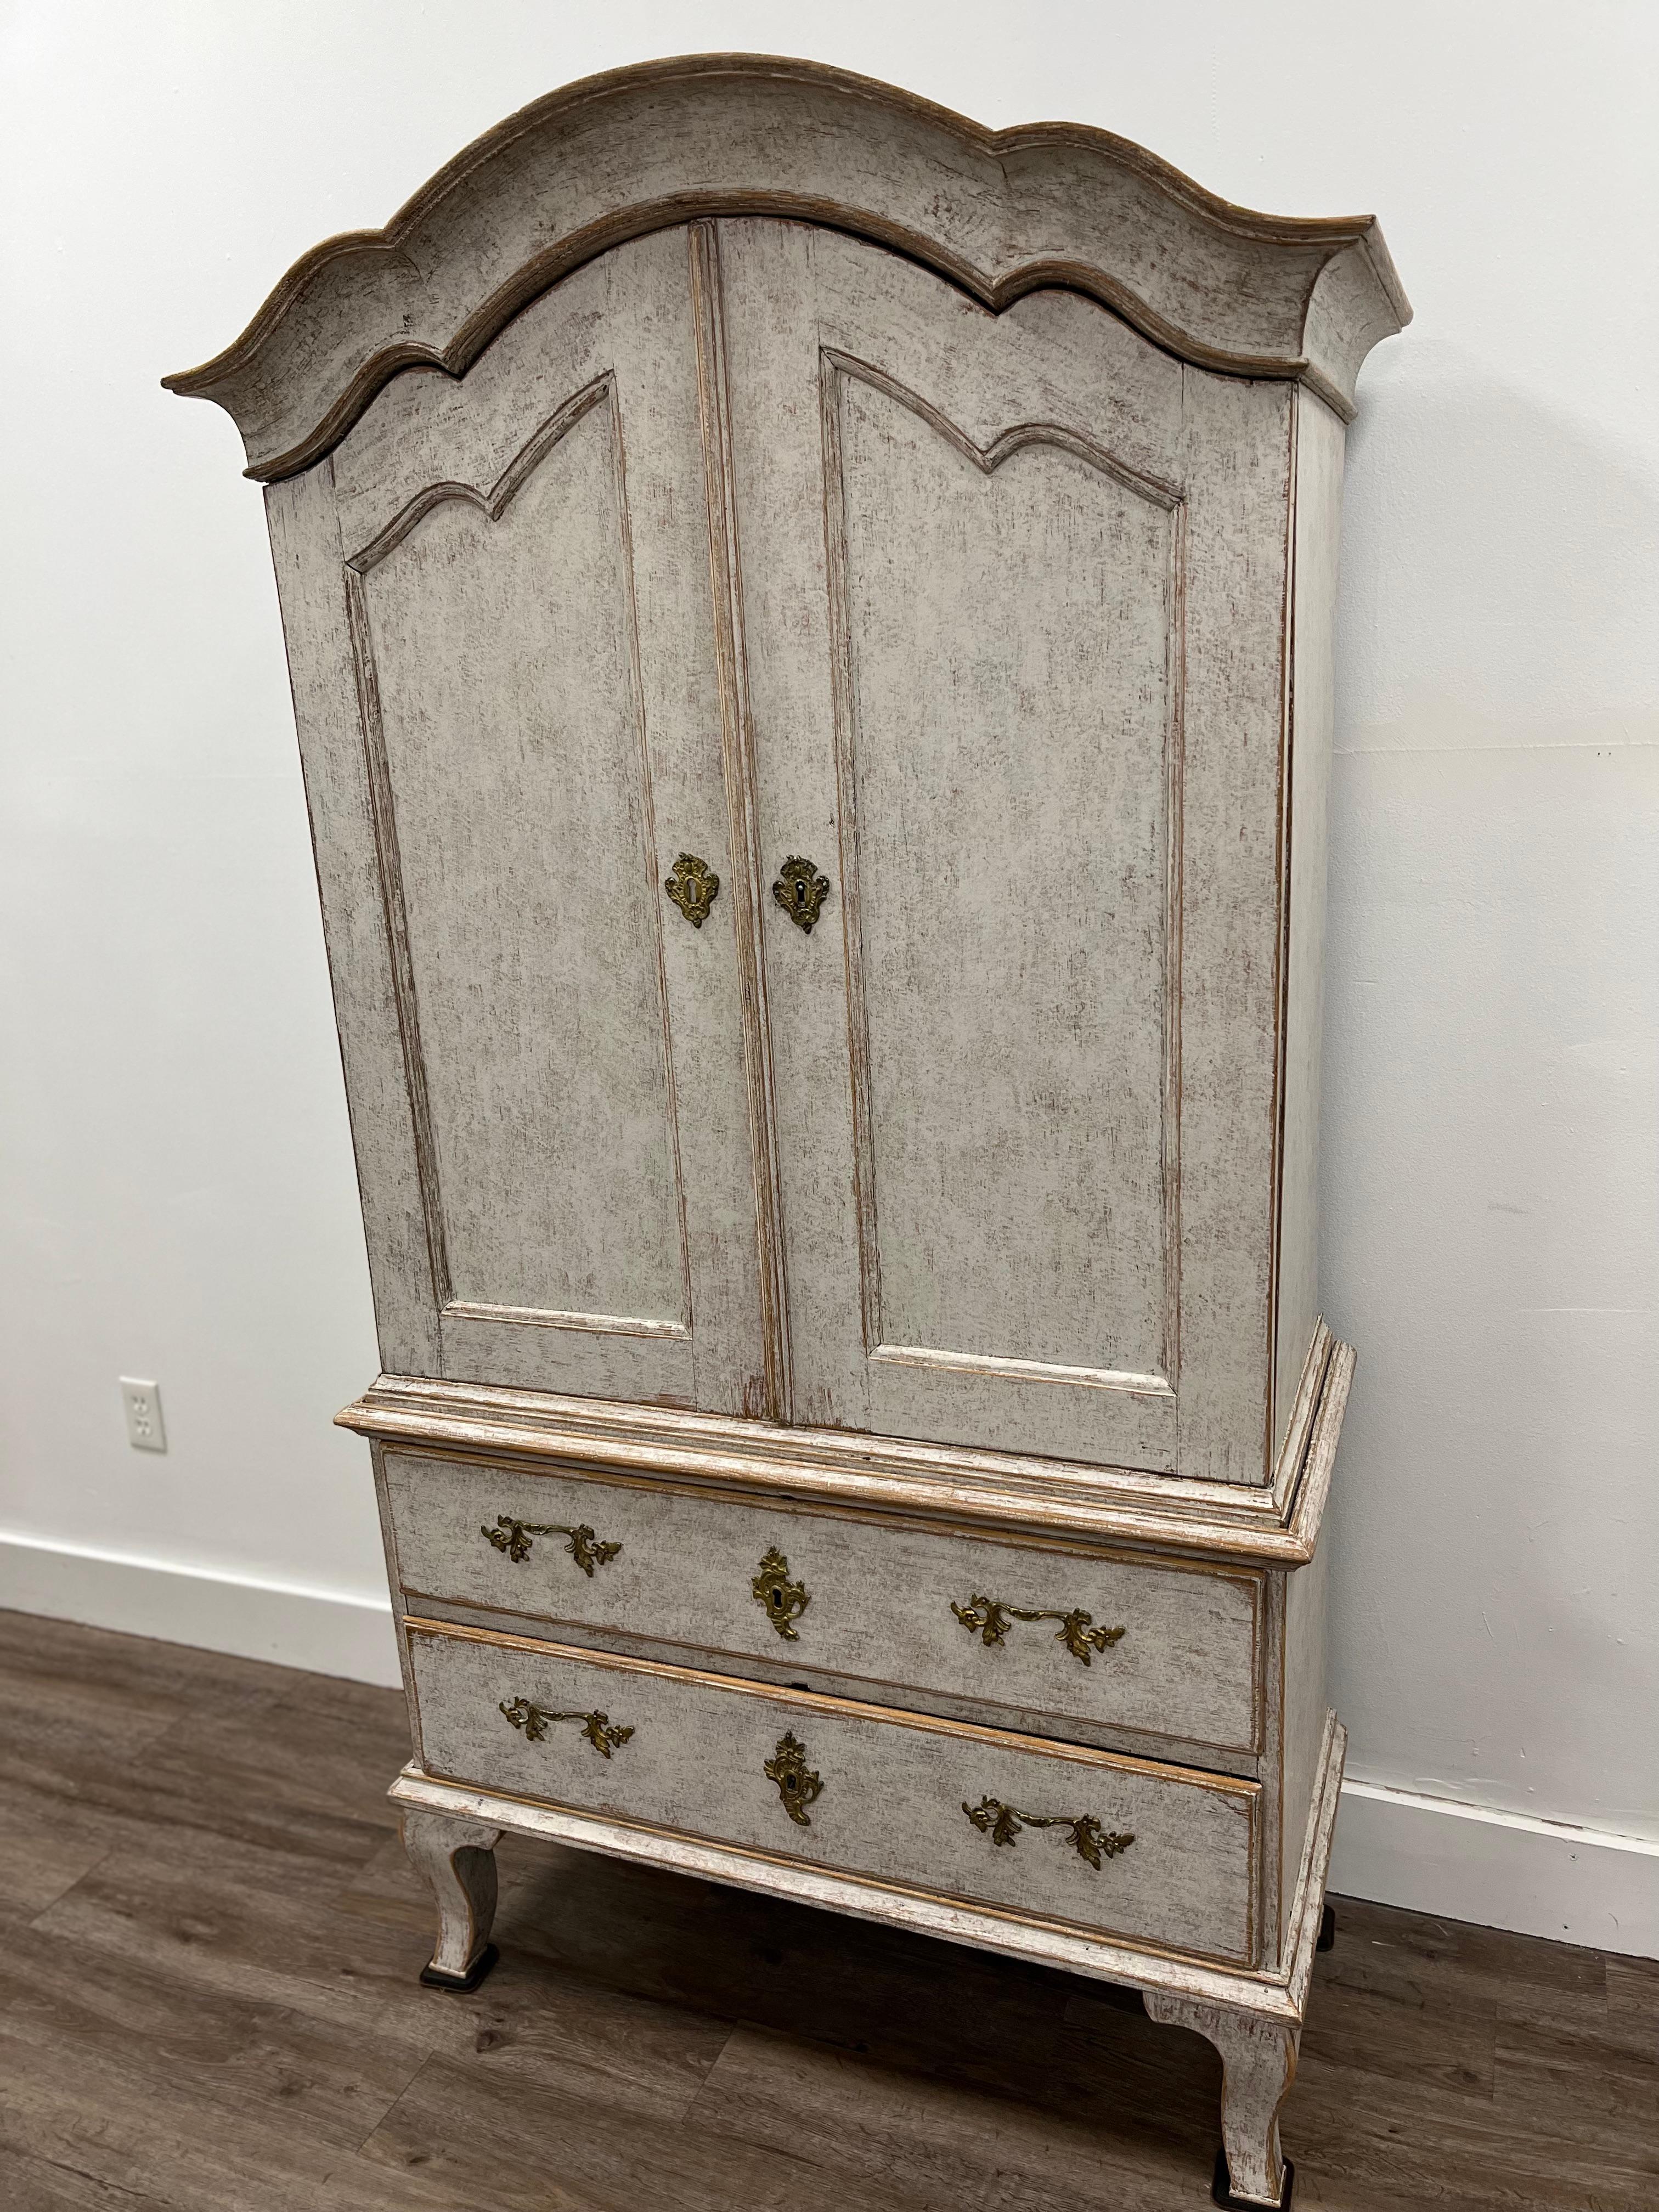 A demure Swedish Rococo cabinet with an impressive overhanging arched pediment cornice bonnet top. Upper section has four shelves and three small drawers with brass pulls. Door fronts have detailed recessed wood carvings. Lower section has two